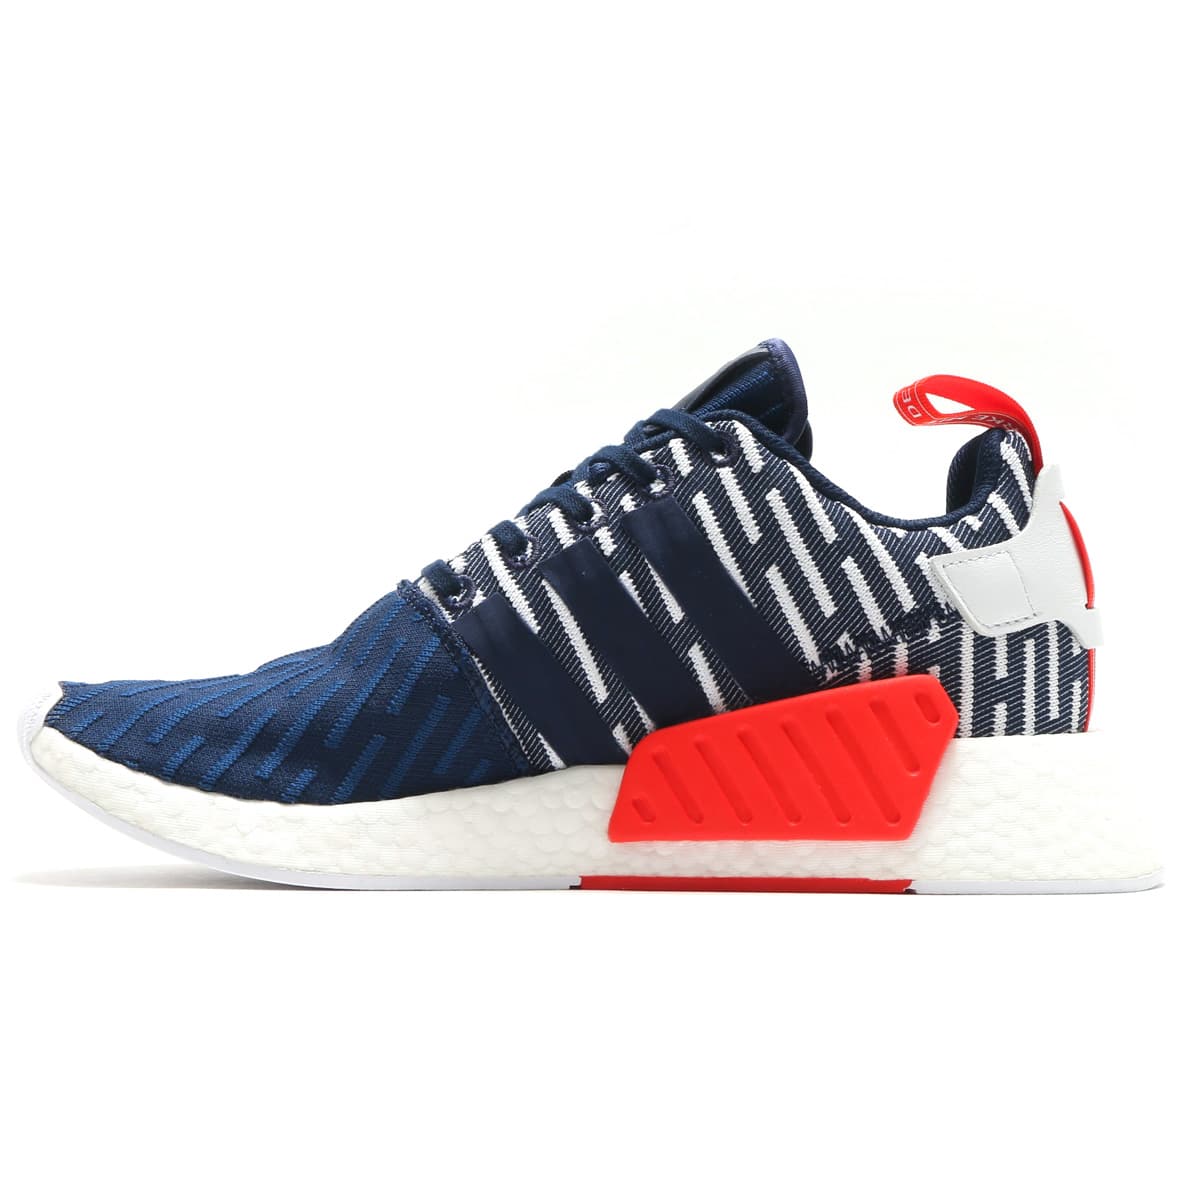 vores peave Indlejre Adidas NMD R2 PK YouTube Review